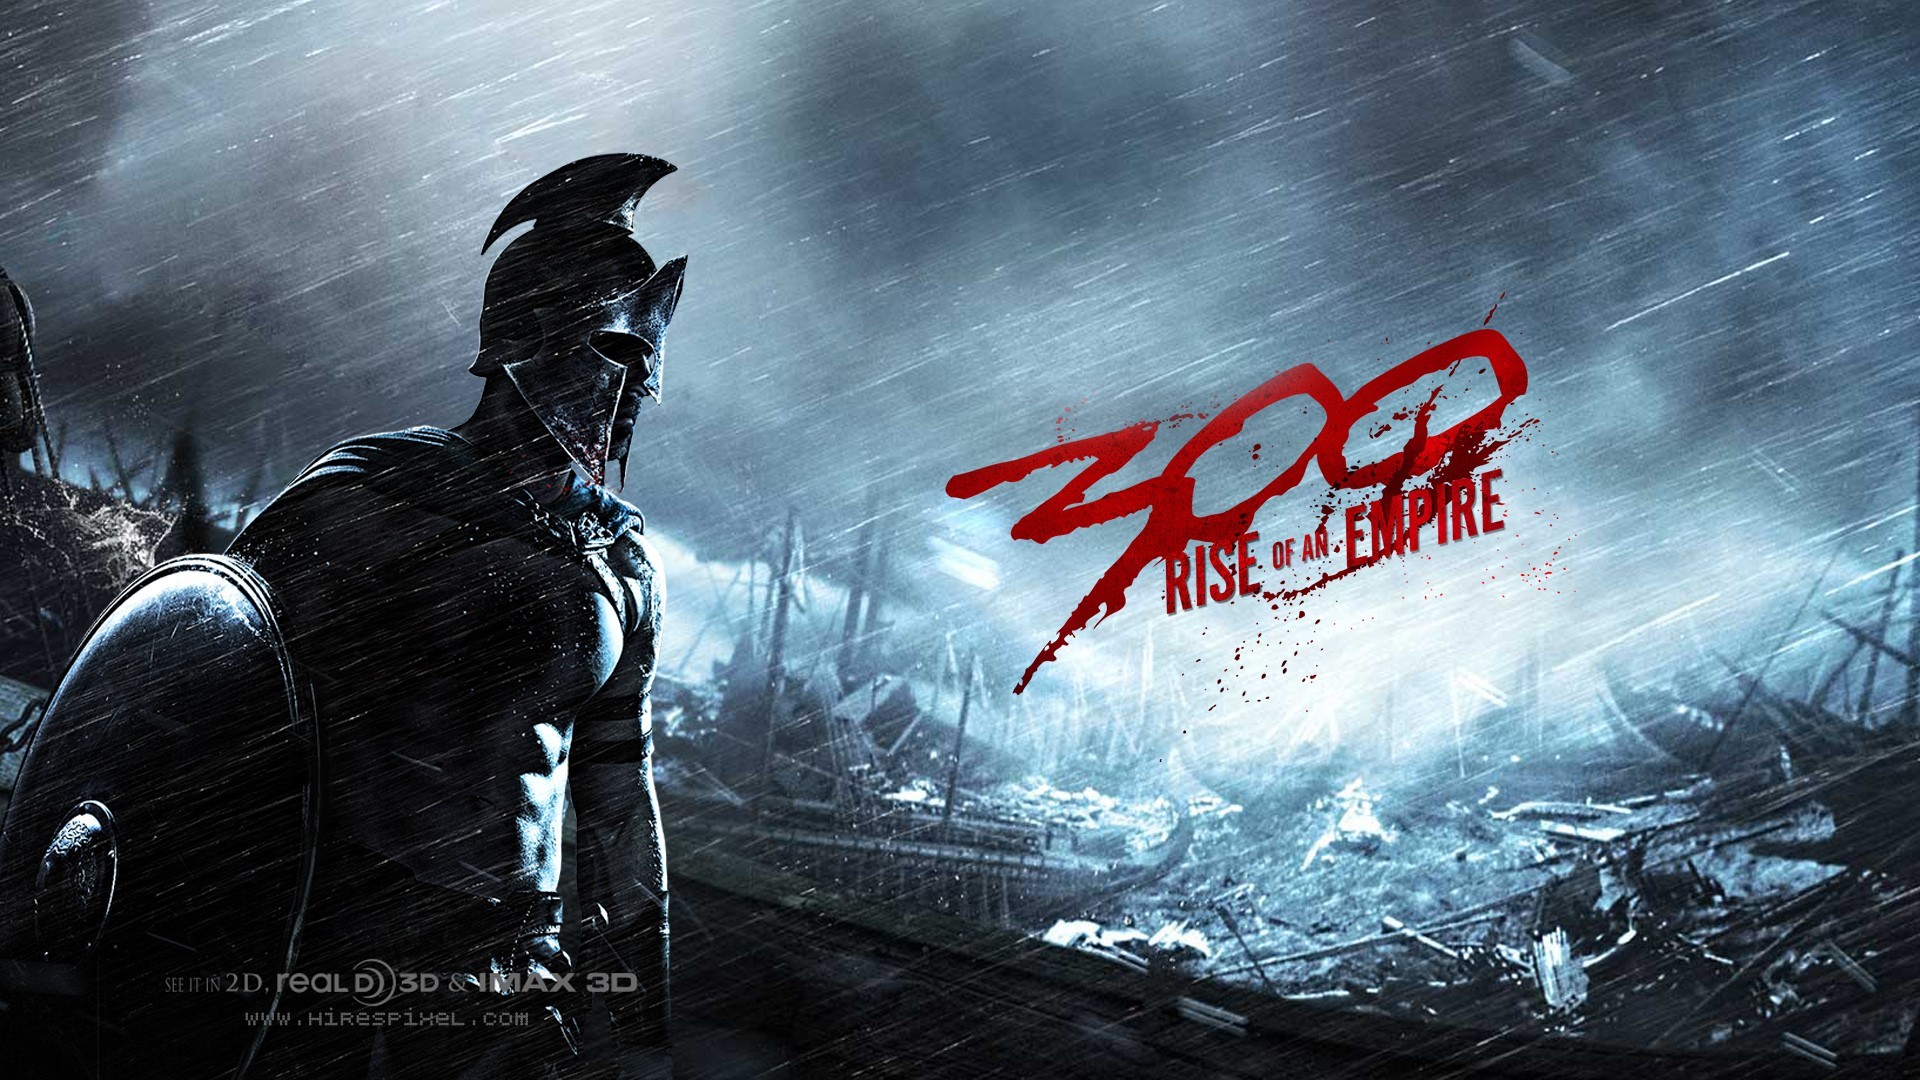 1920x1080 300 Rise Of An Empire Wallpaper Hd Pictures 4 HD Wallpapers